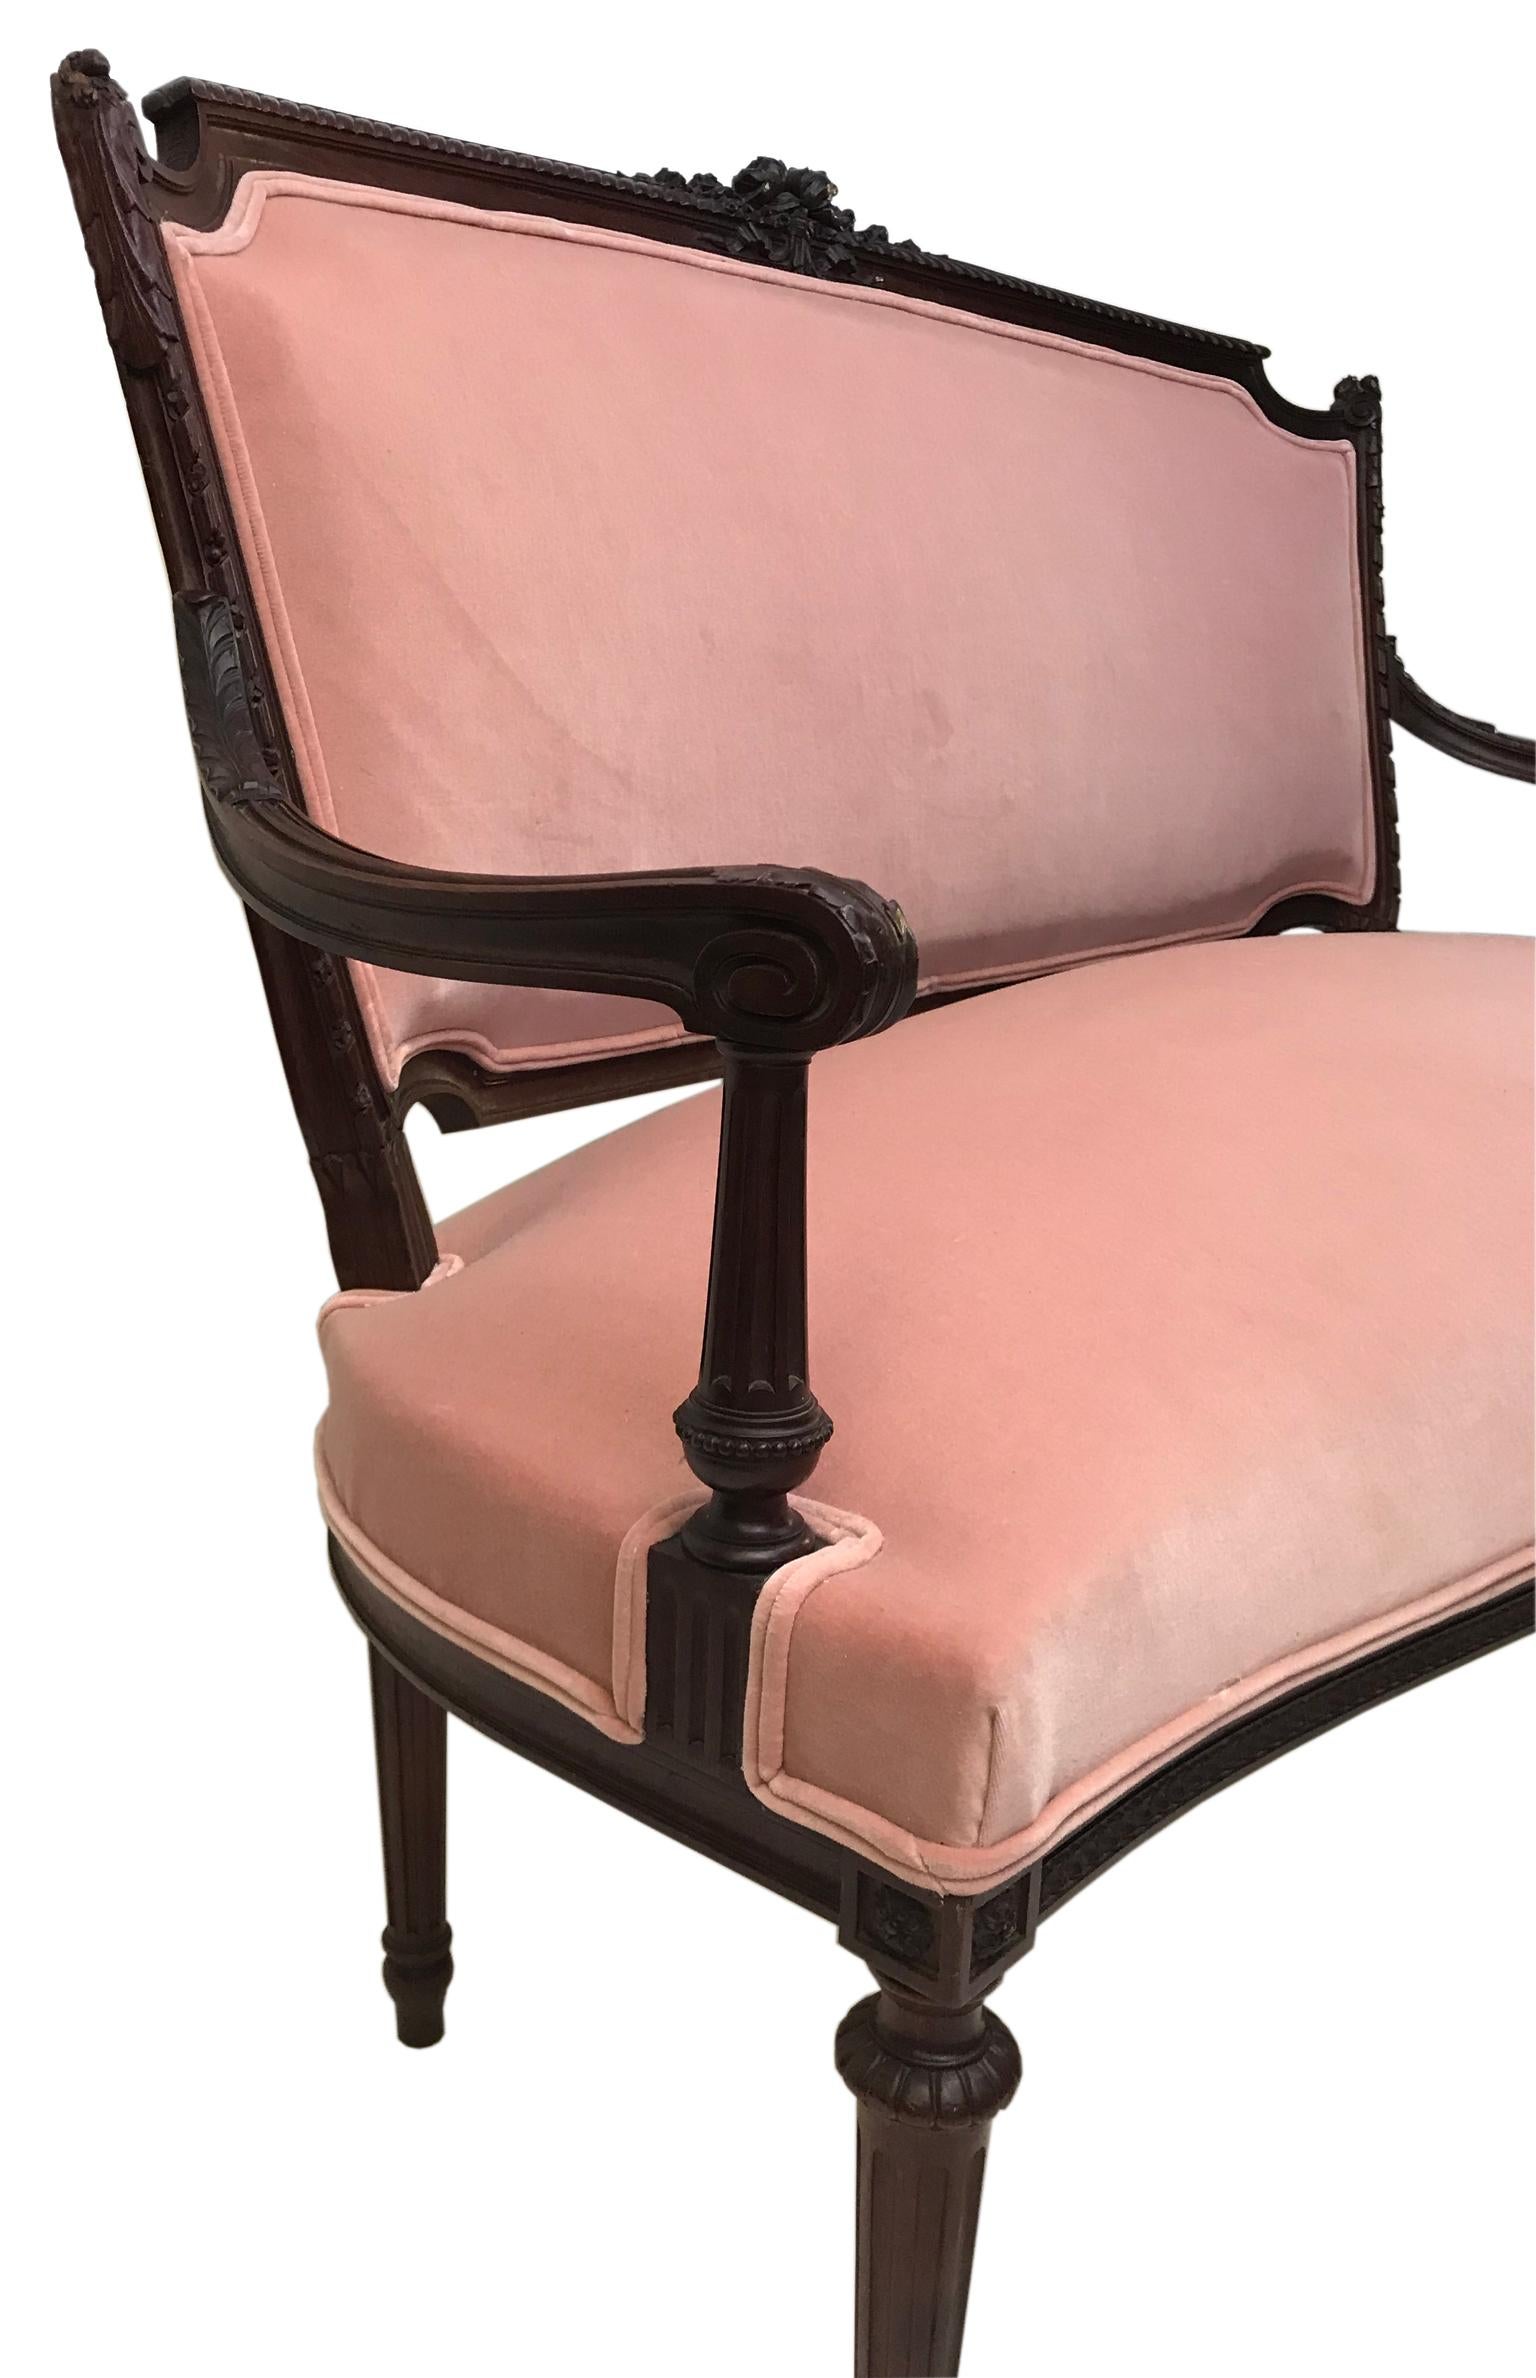 French FRENCH Belle Époque SETTEE in LOUIS XVI Style Rose Pink Velvet Upholstery 1880 For Sale